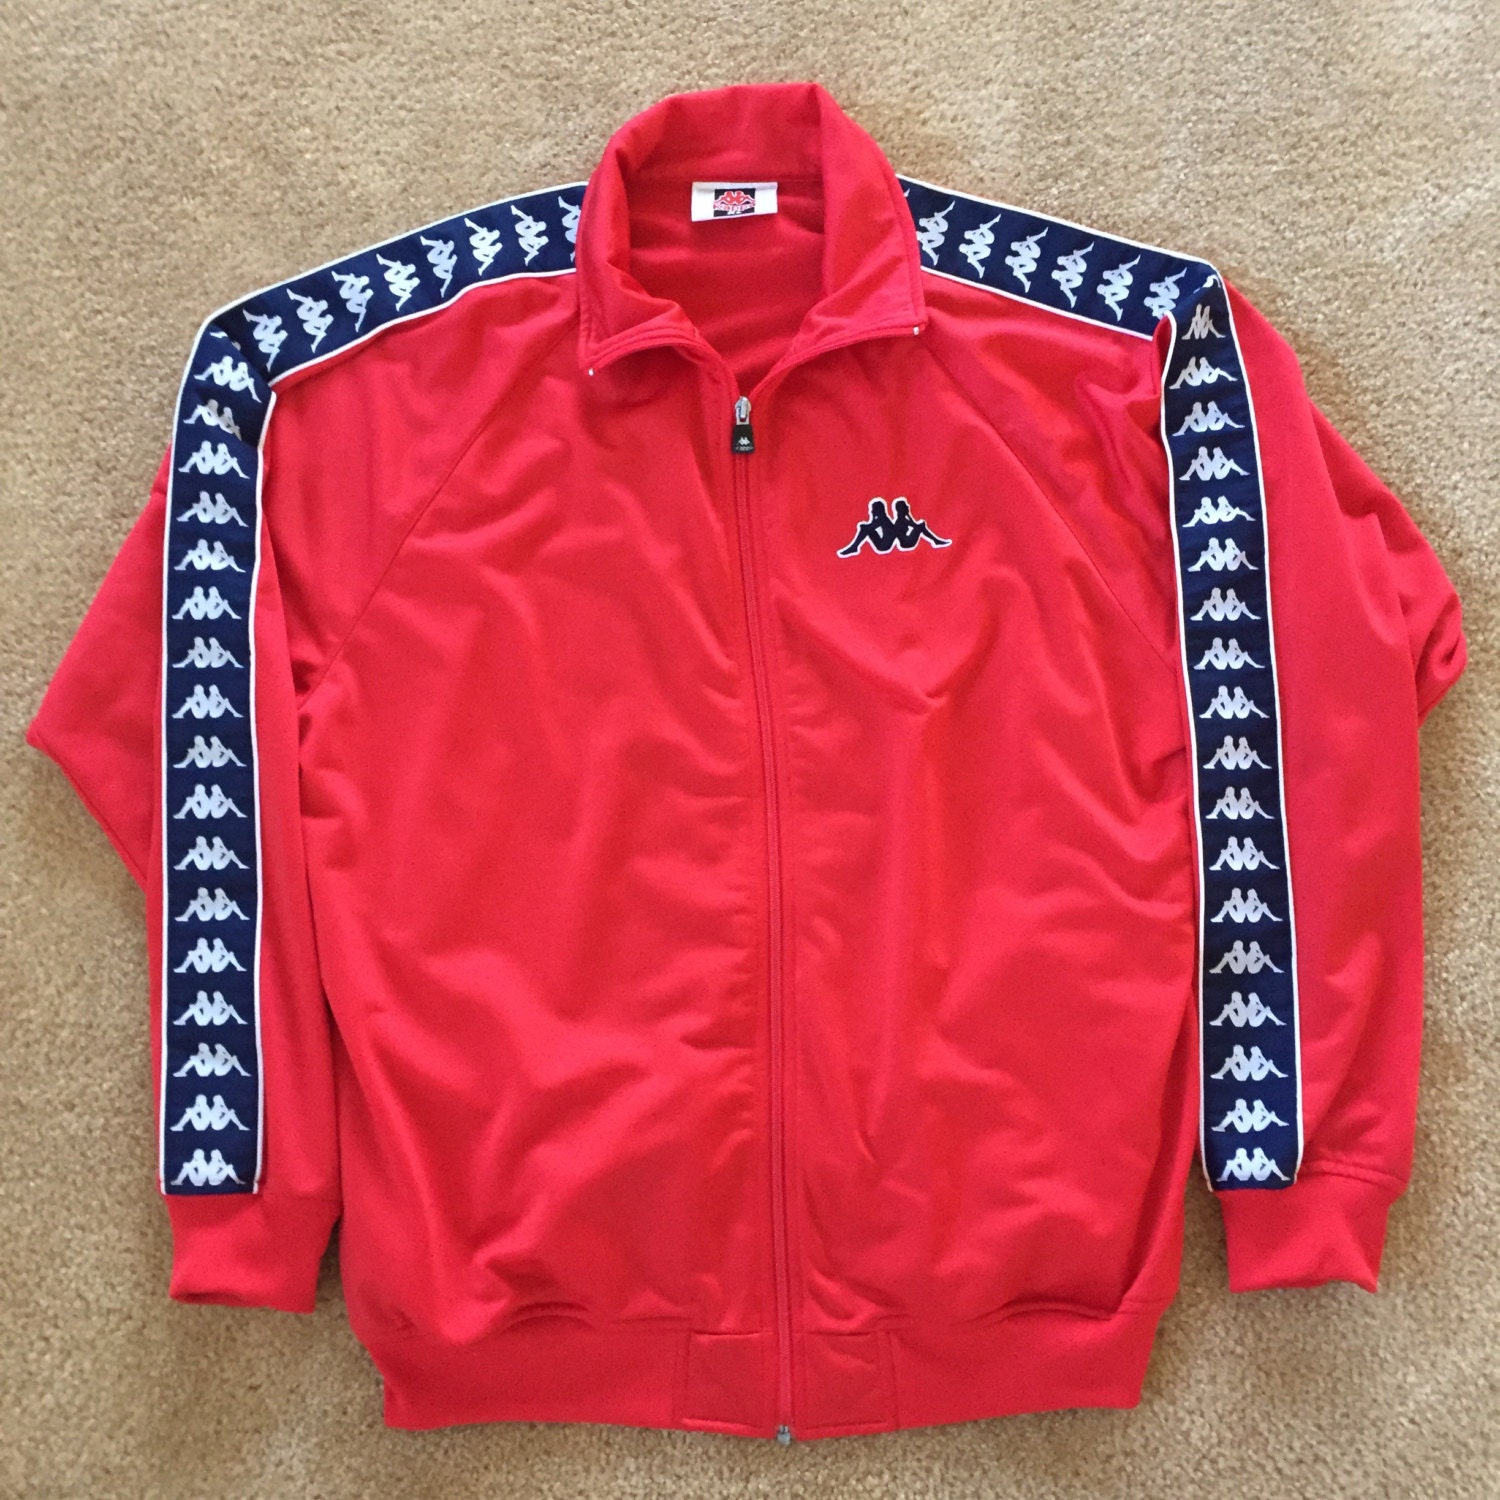 Vintage Kappa Red White and Blue Track Jacket Men's Size